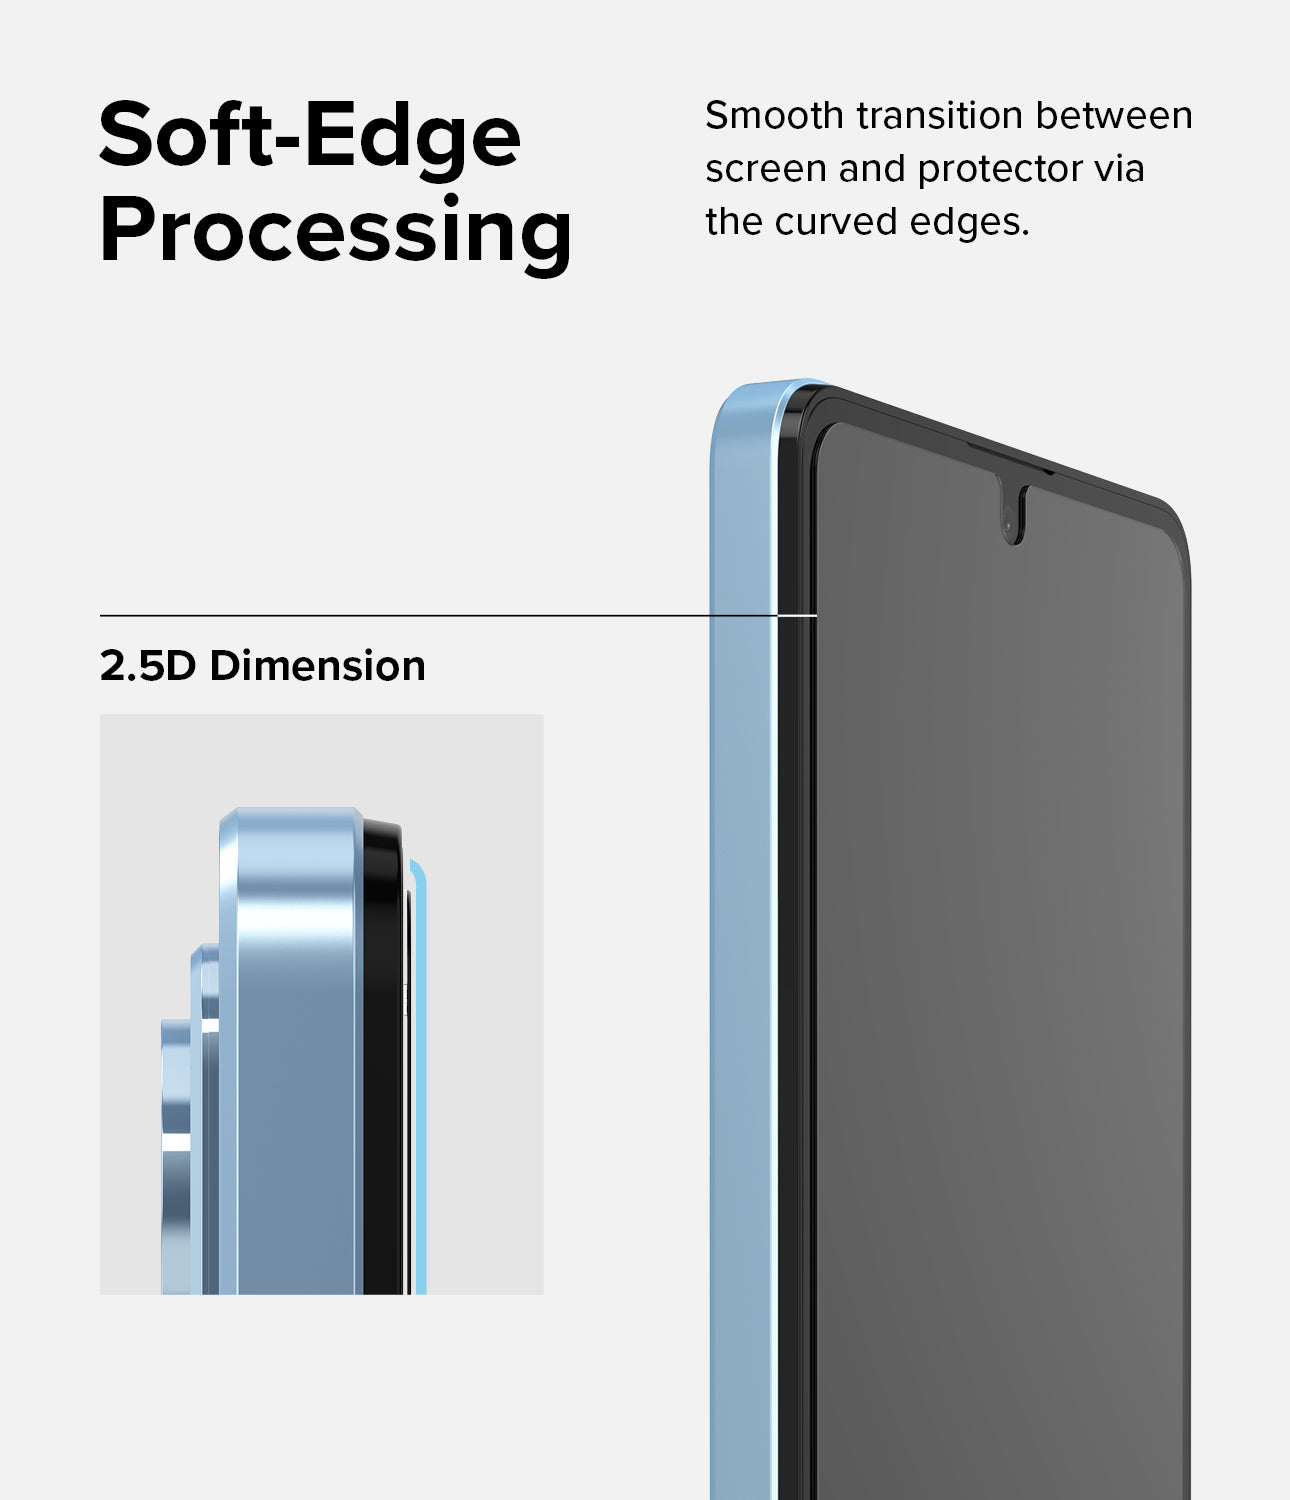 Smooth transition between screen and protector via the curved edges